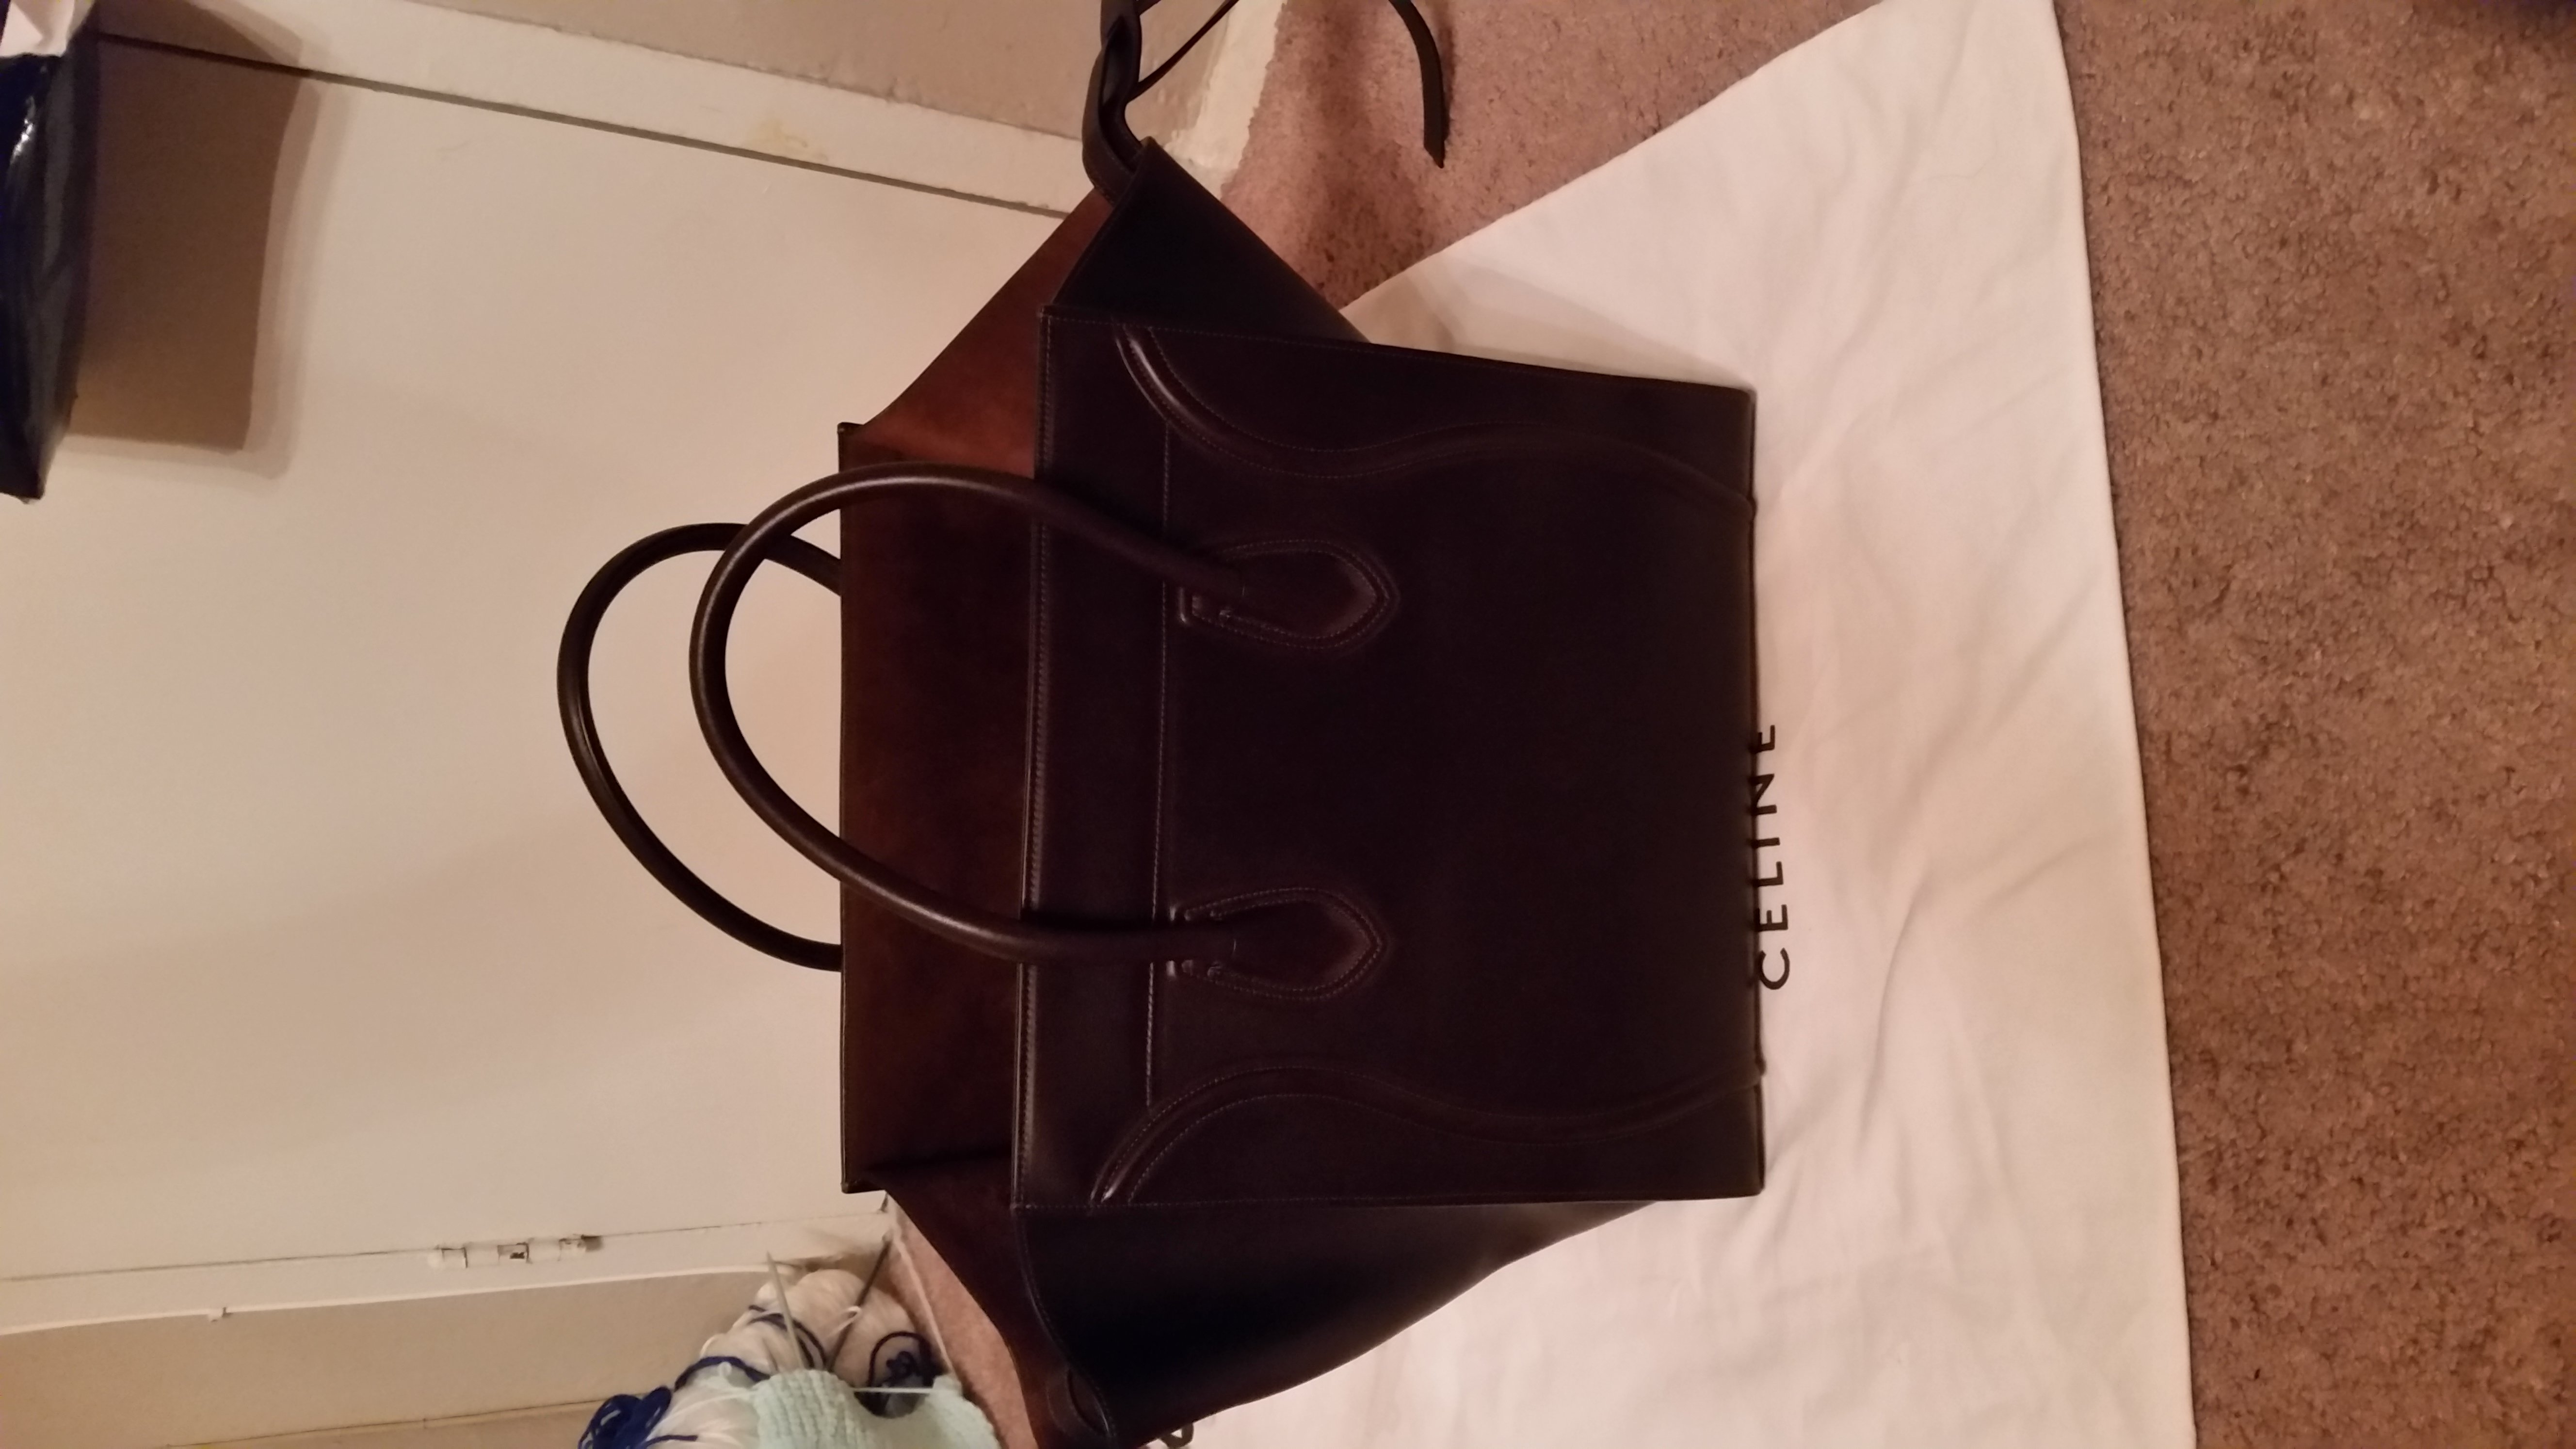 I Almost Lost 1640 USD On A Fake Celine Bag Through